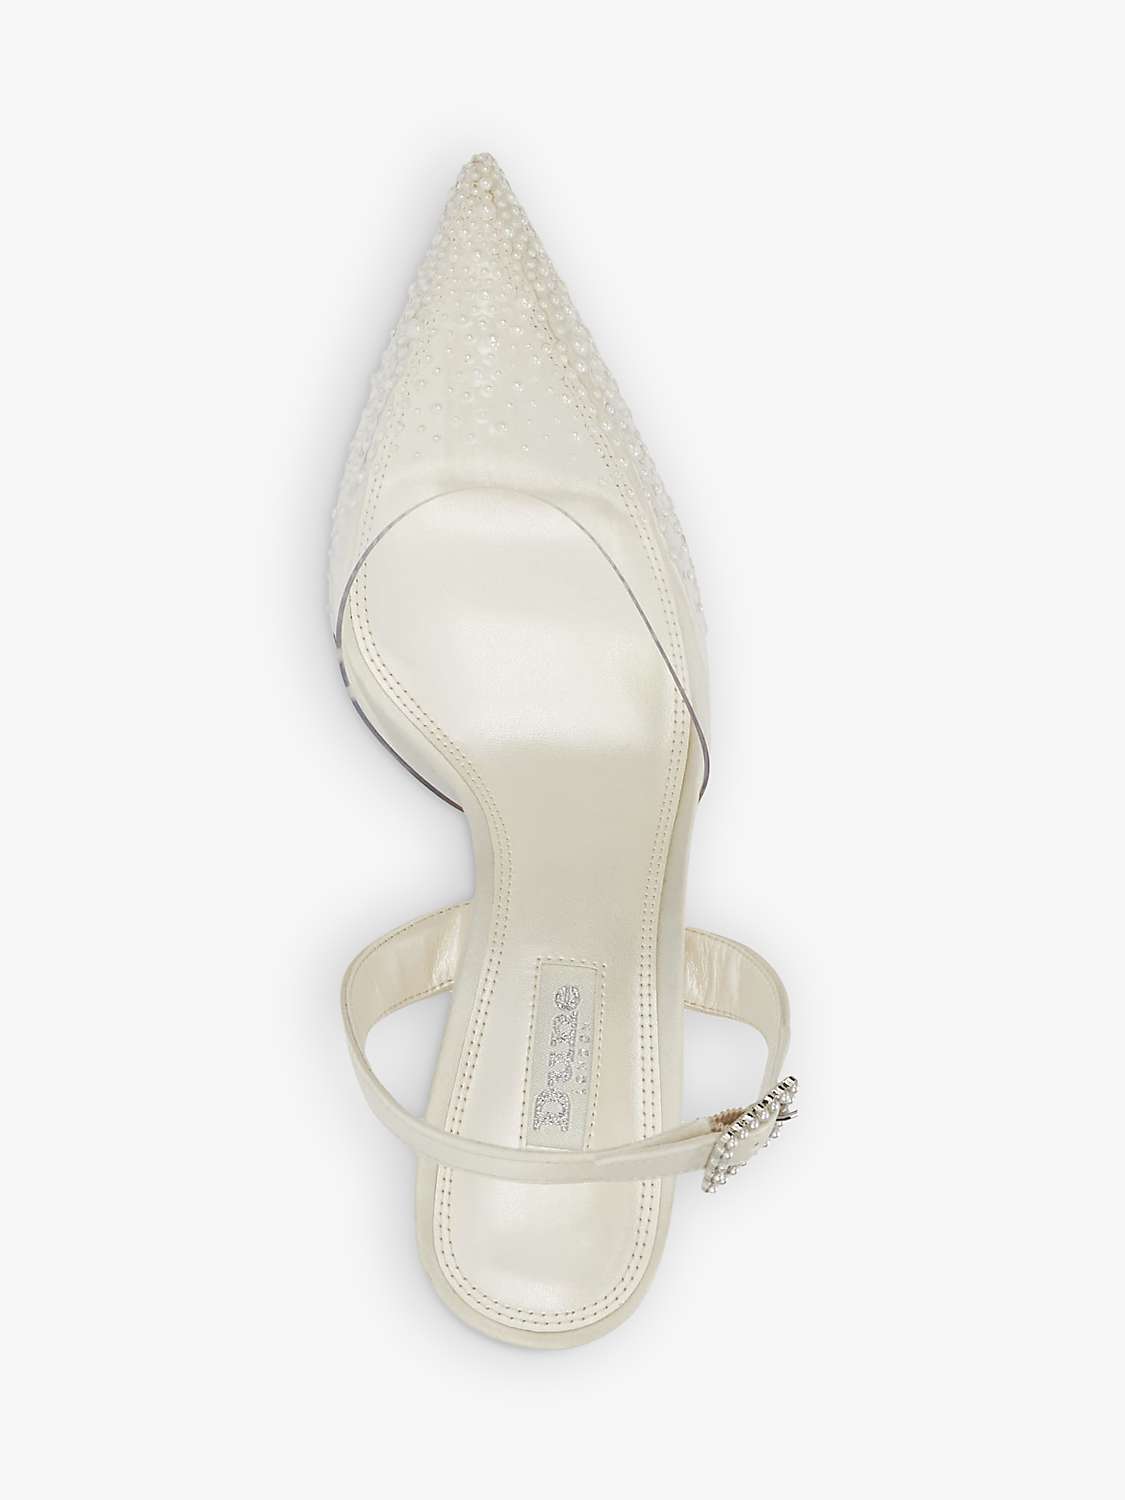 Buy Dune Bridal Collection Divinely Sea Pearl Slingback Court Shoes, Ivory Online at johnlewis.com